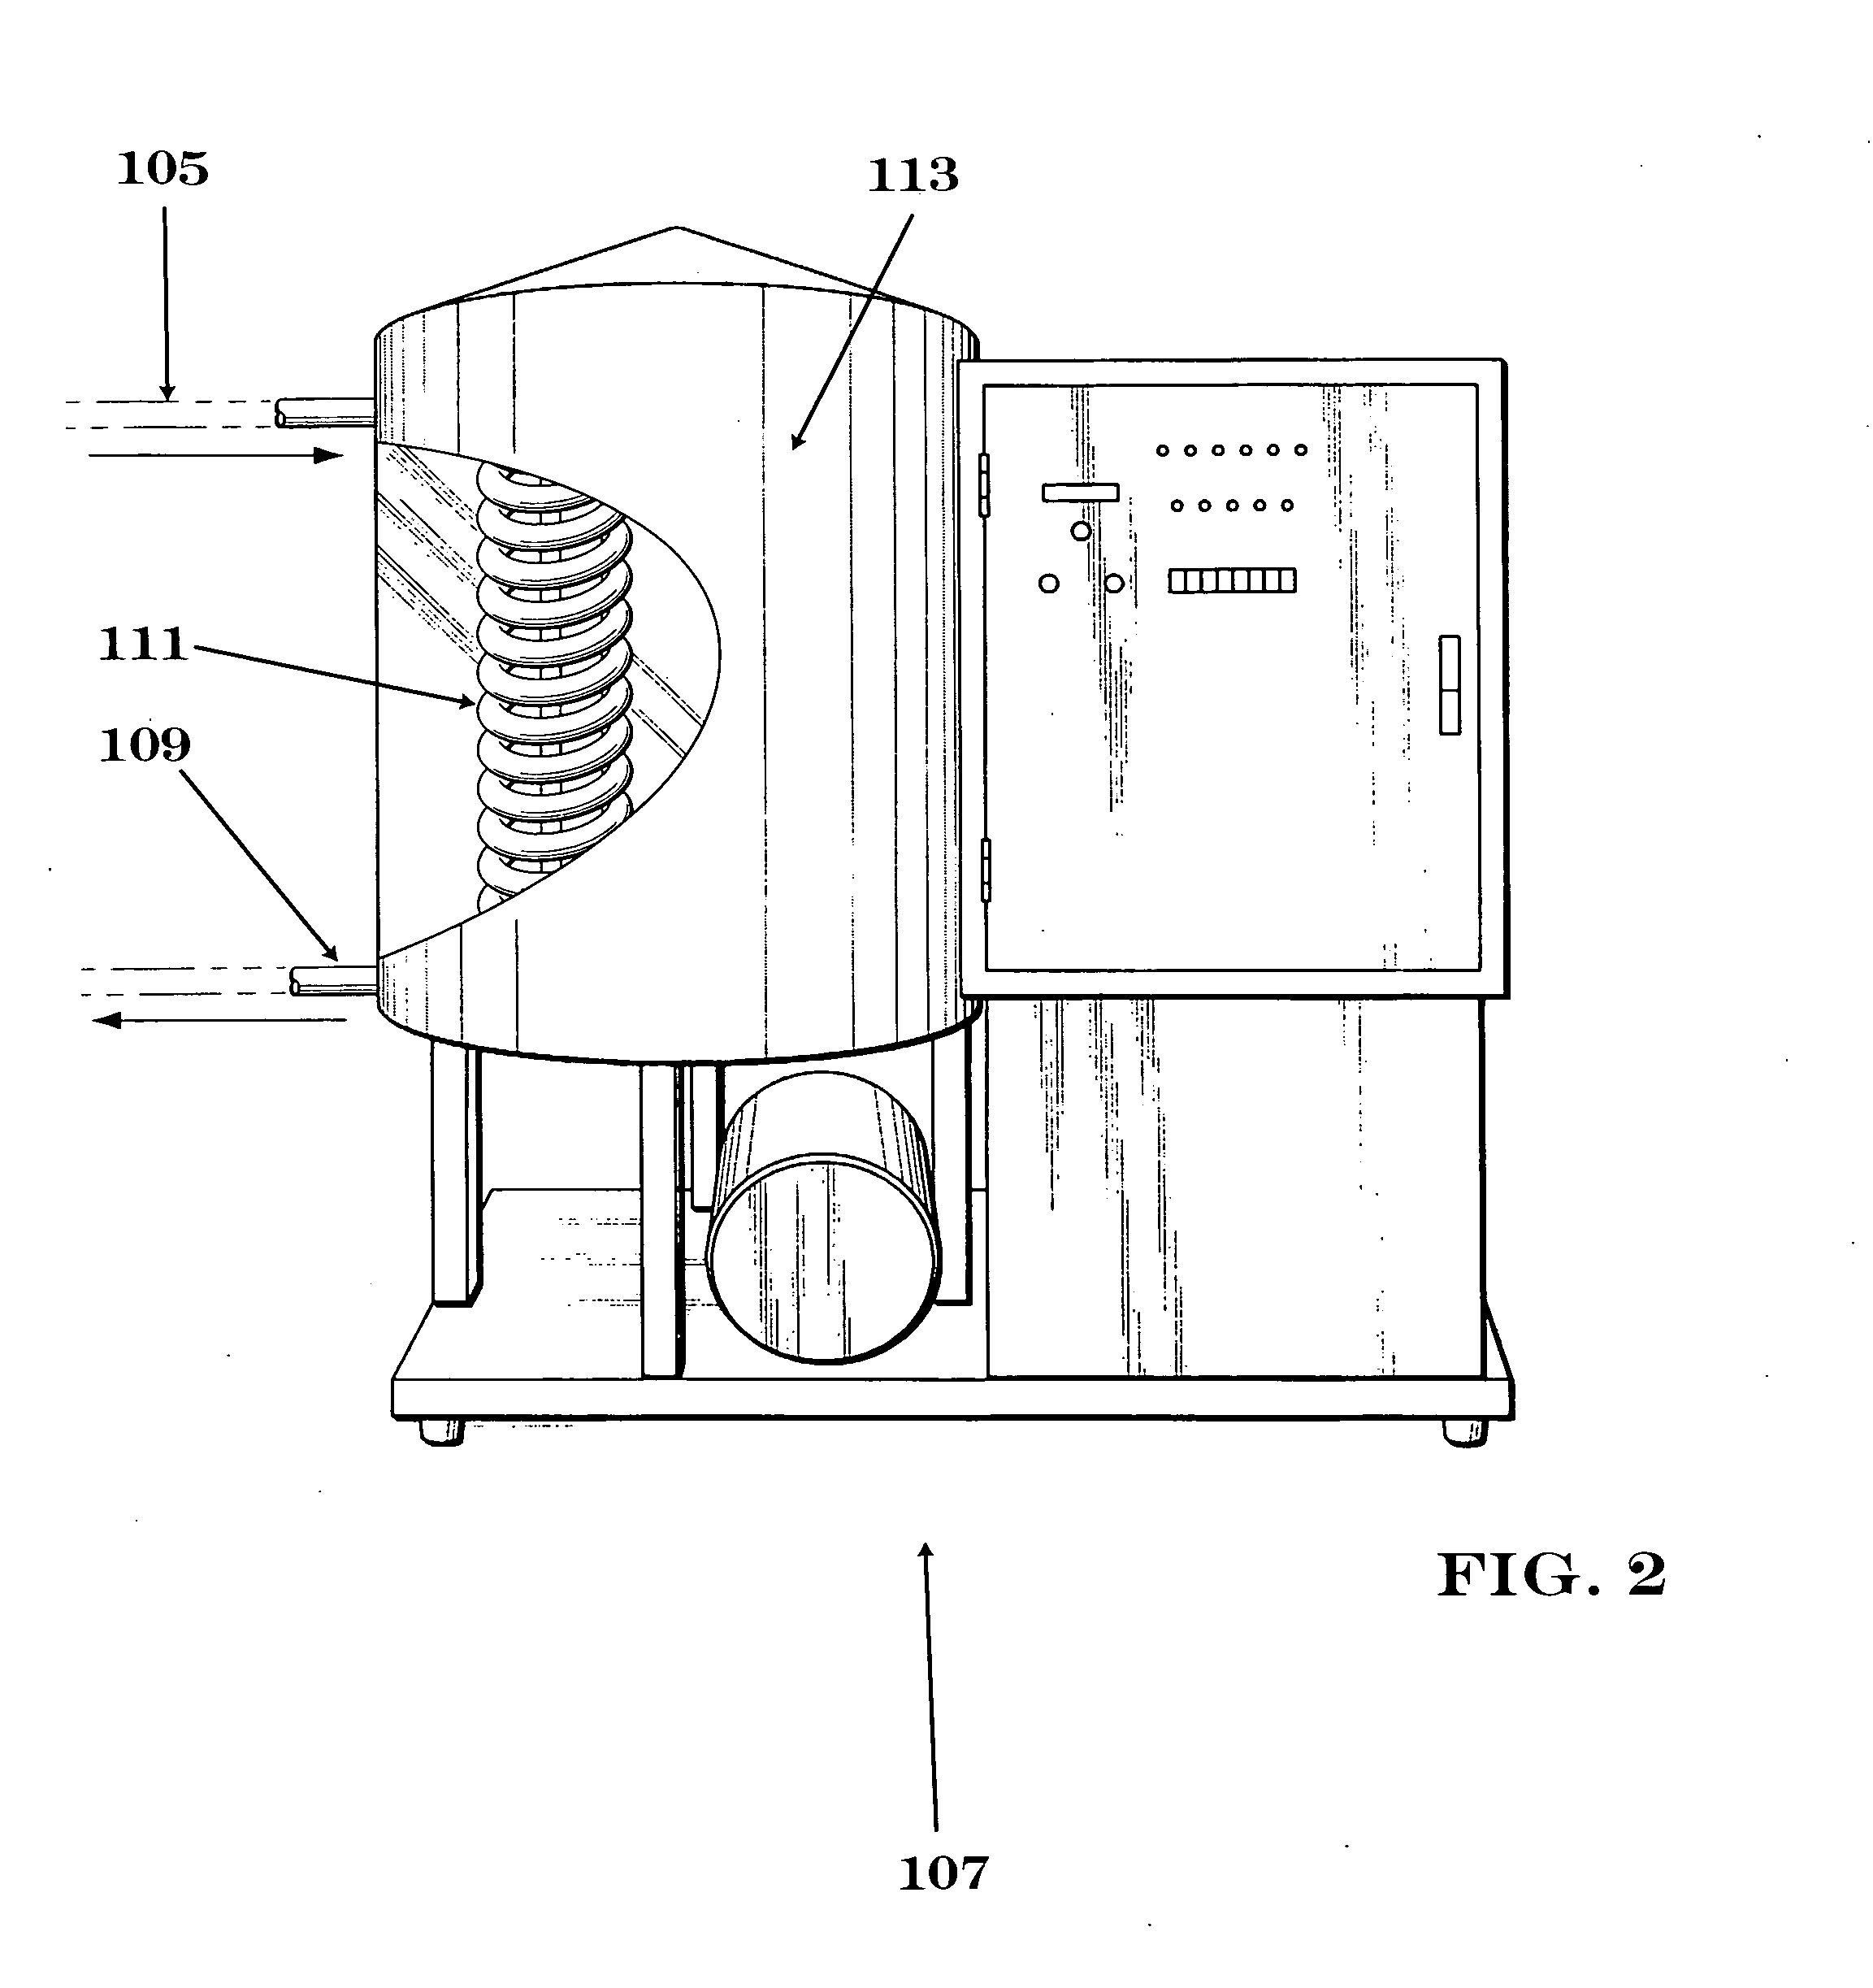 Apparatus and method for inline solid, semisolid, or liquid antimicrobial treatment